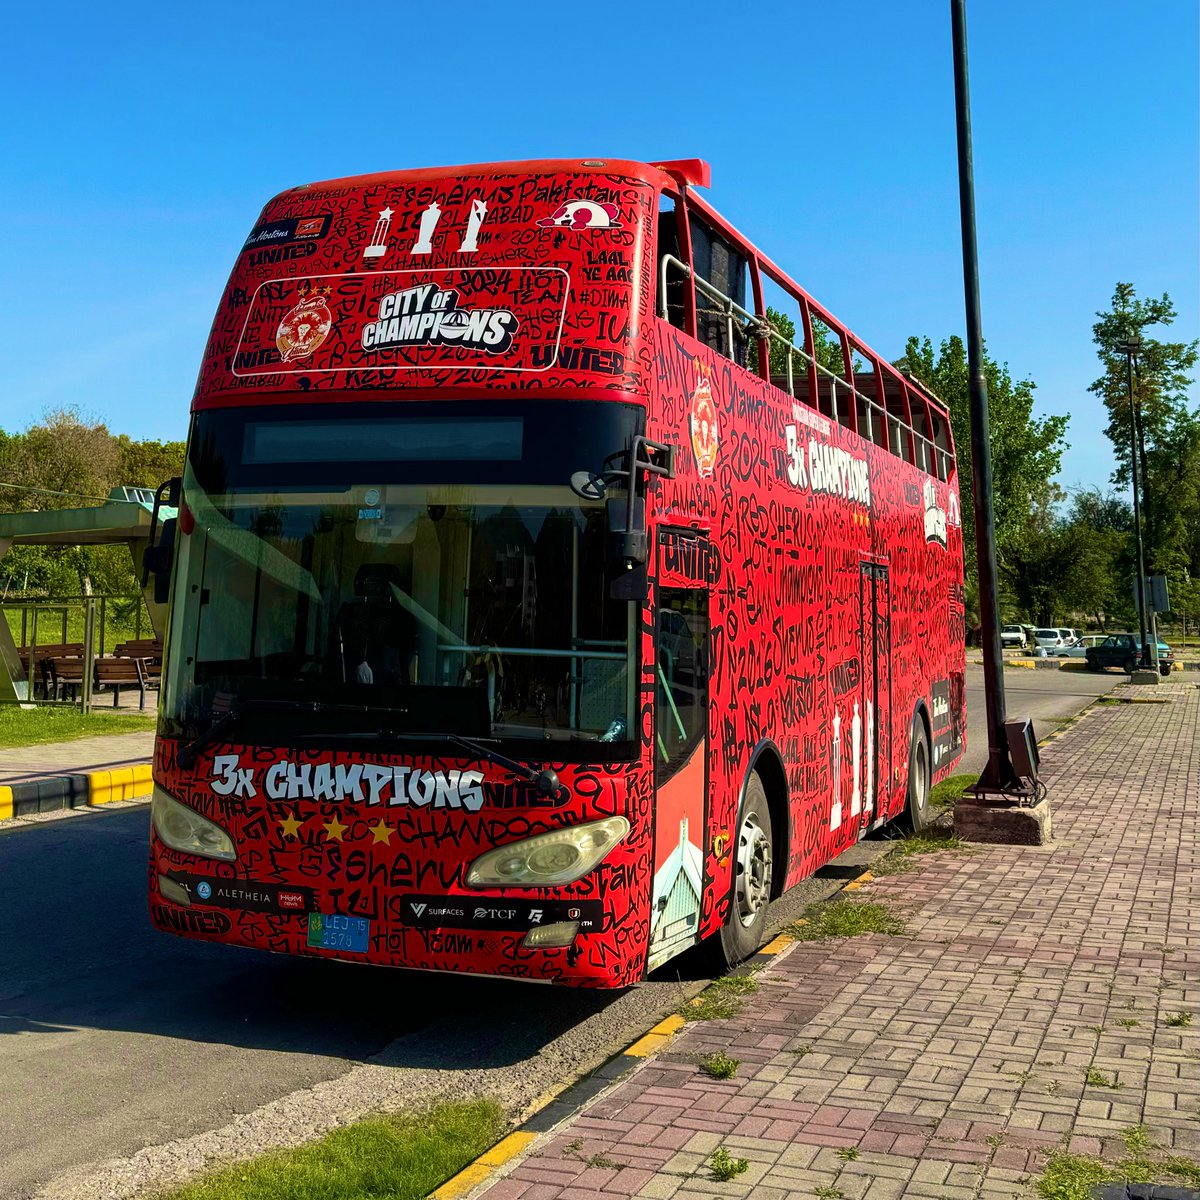 Beep beep 📣

Next stop: Victory Parade! 🚨

 ⌚️ 5:00 PM to 8:00 PM
📍 From Shalimar ground to F9 Park

#VictoryCelebration #3xChampions #UnitedWeWin #CityOfChampions